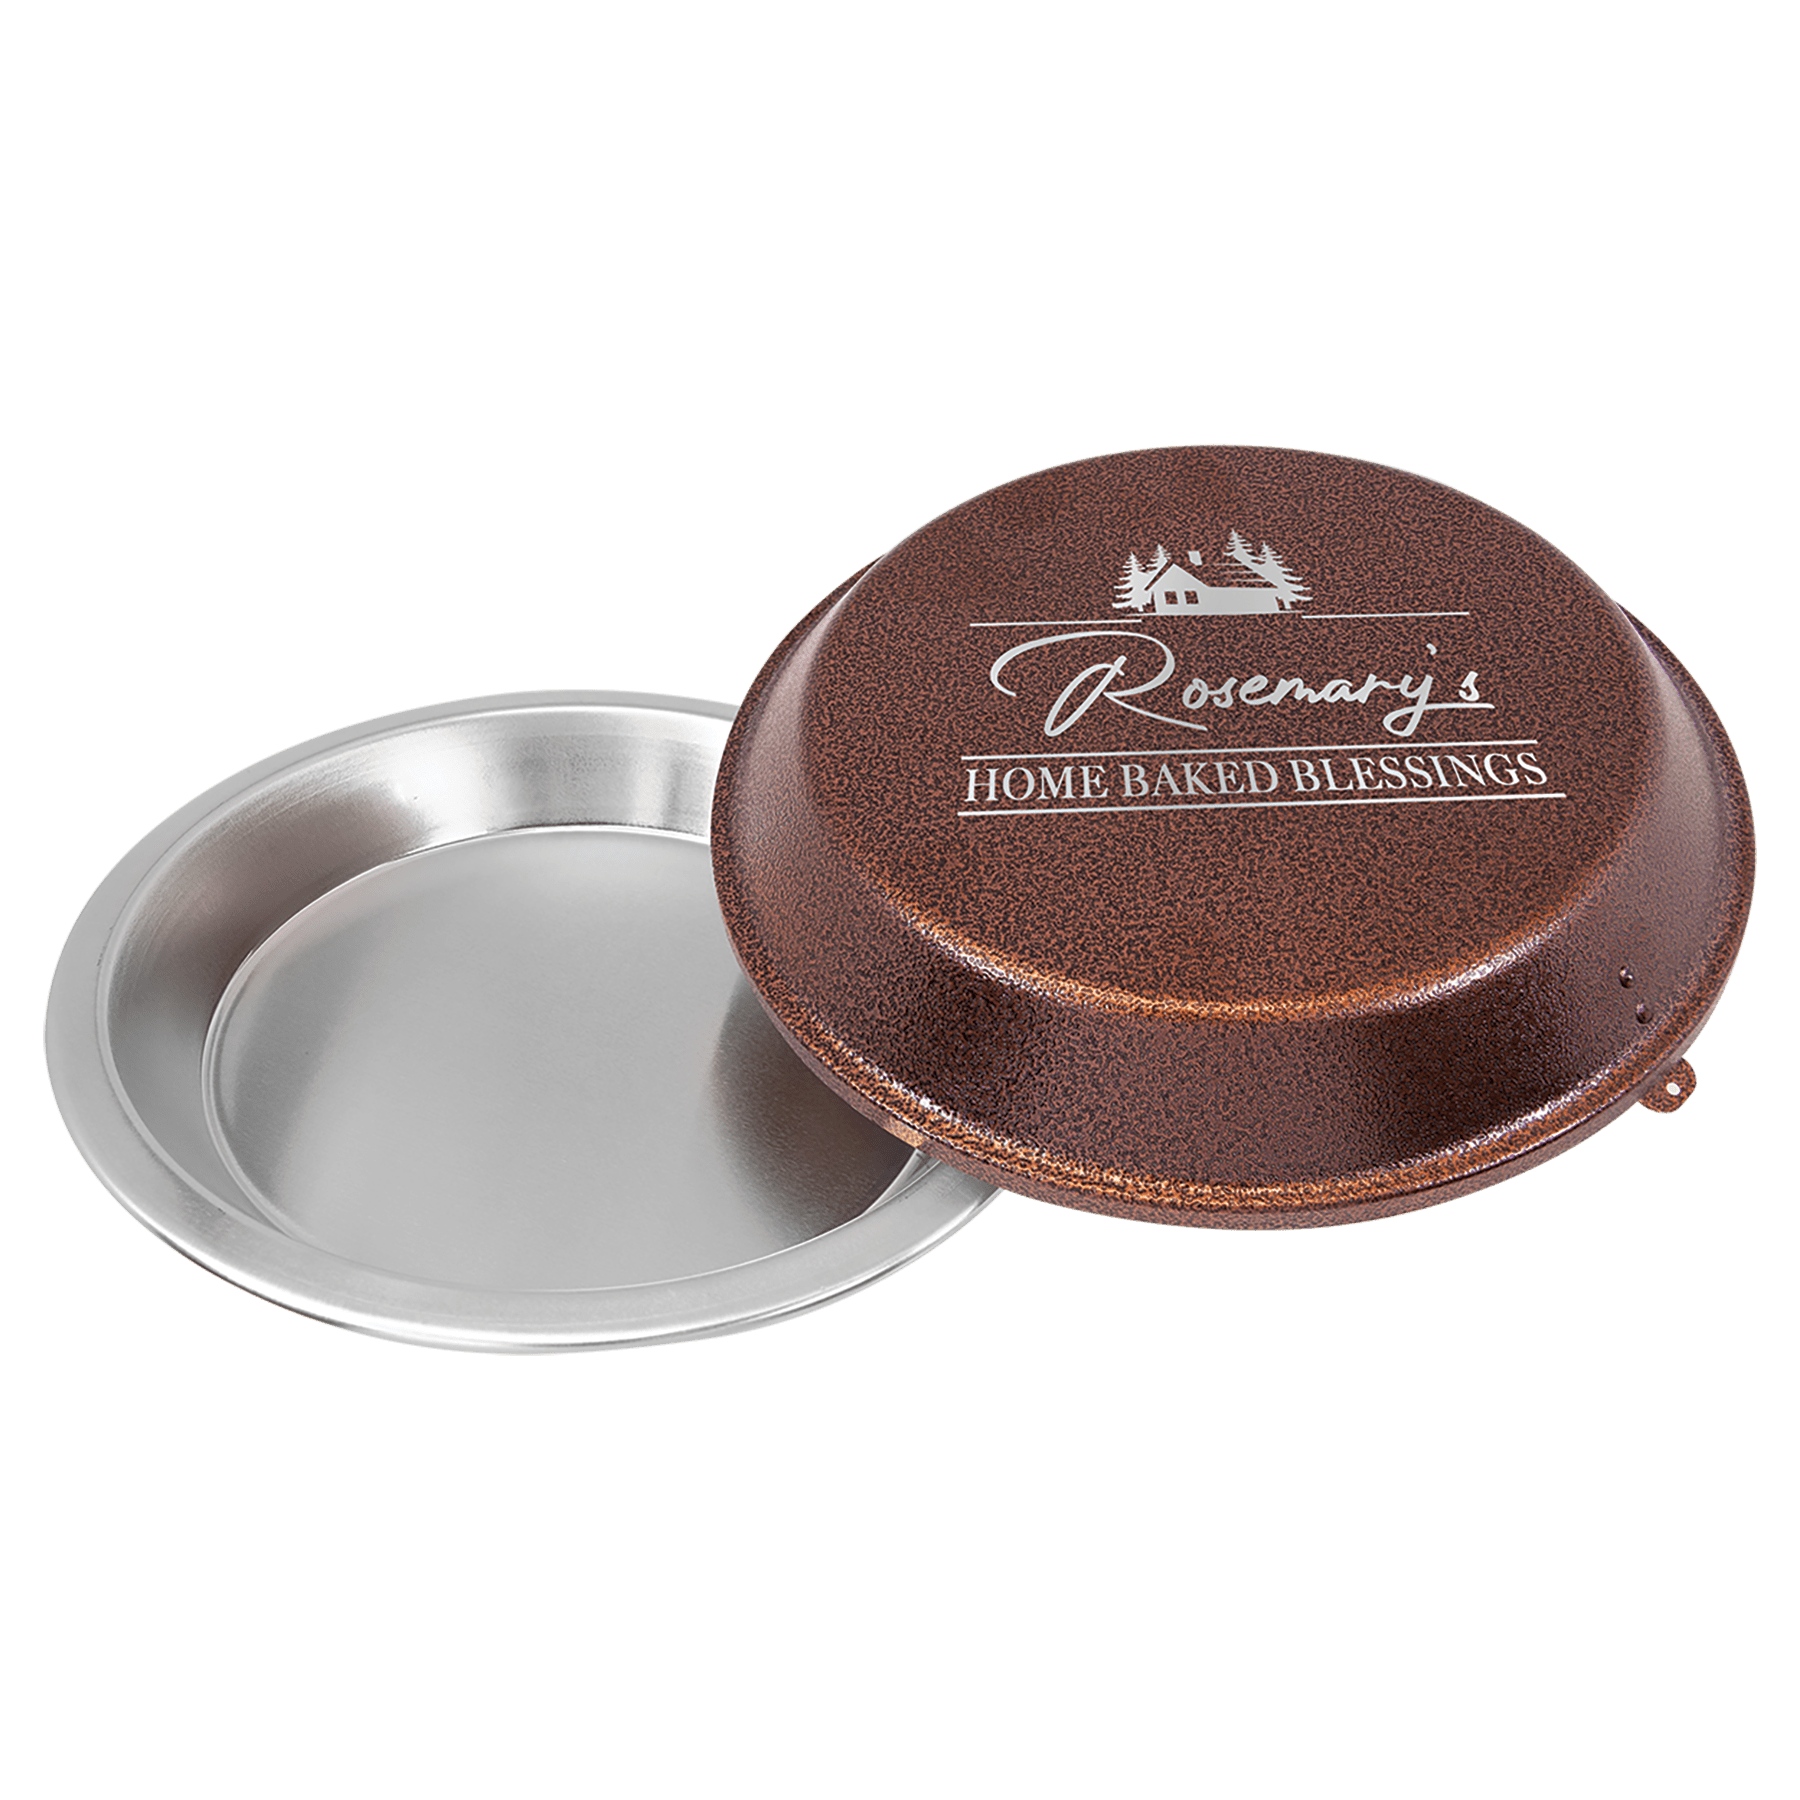 Personalized Pie Tins